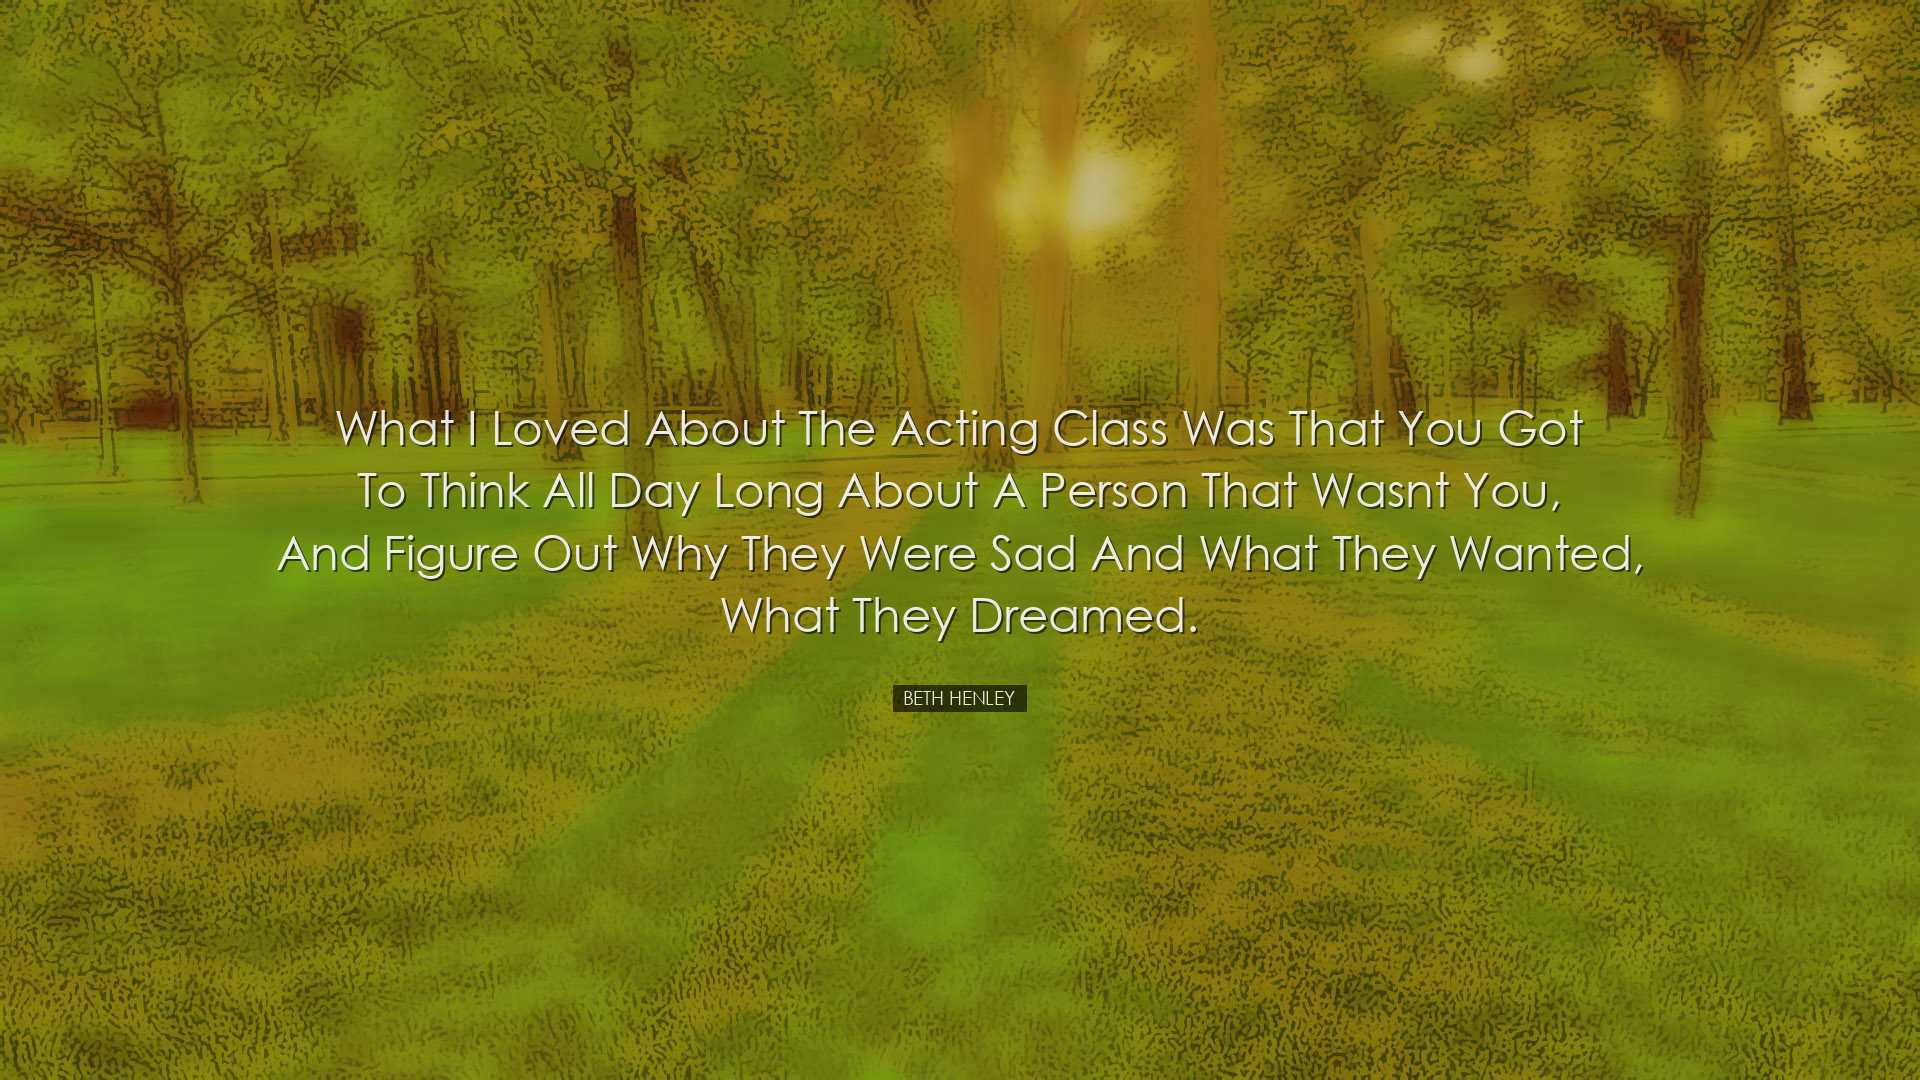 What I loved about the acting class was that you got to think all